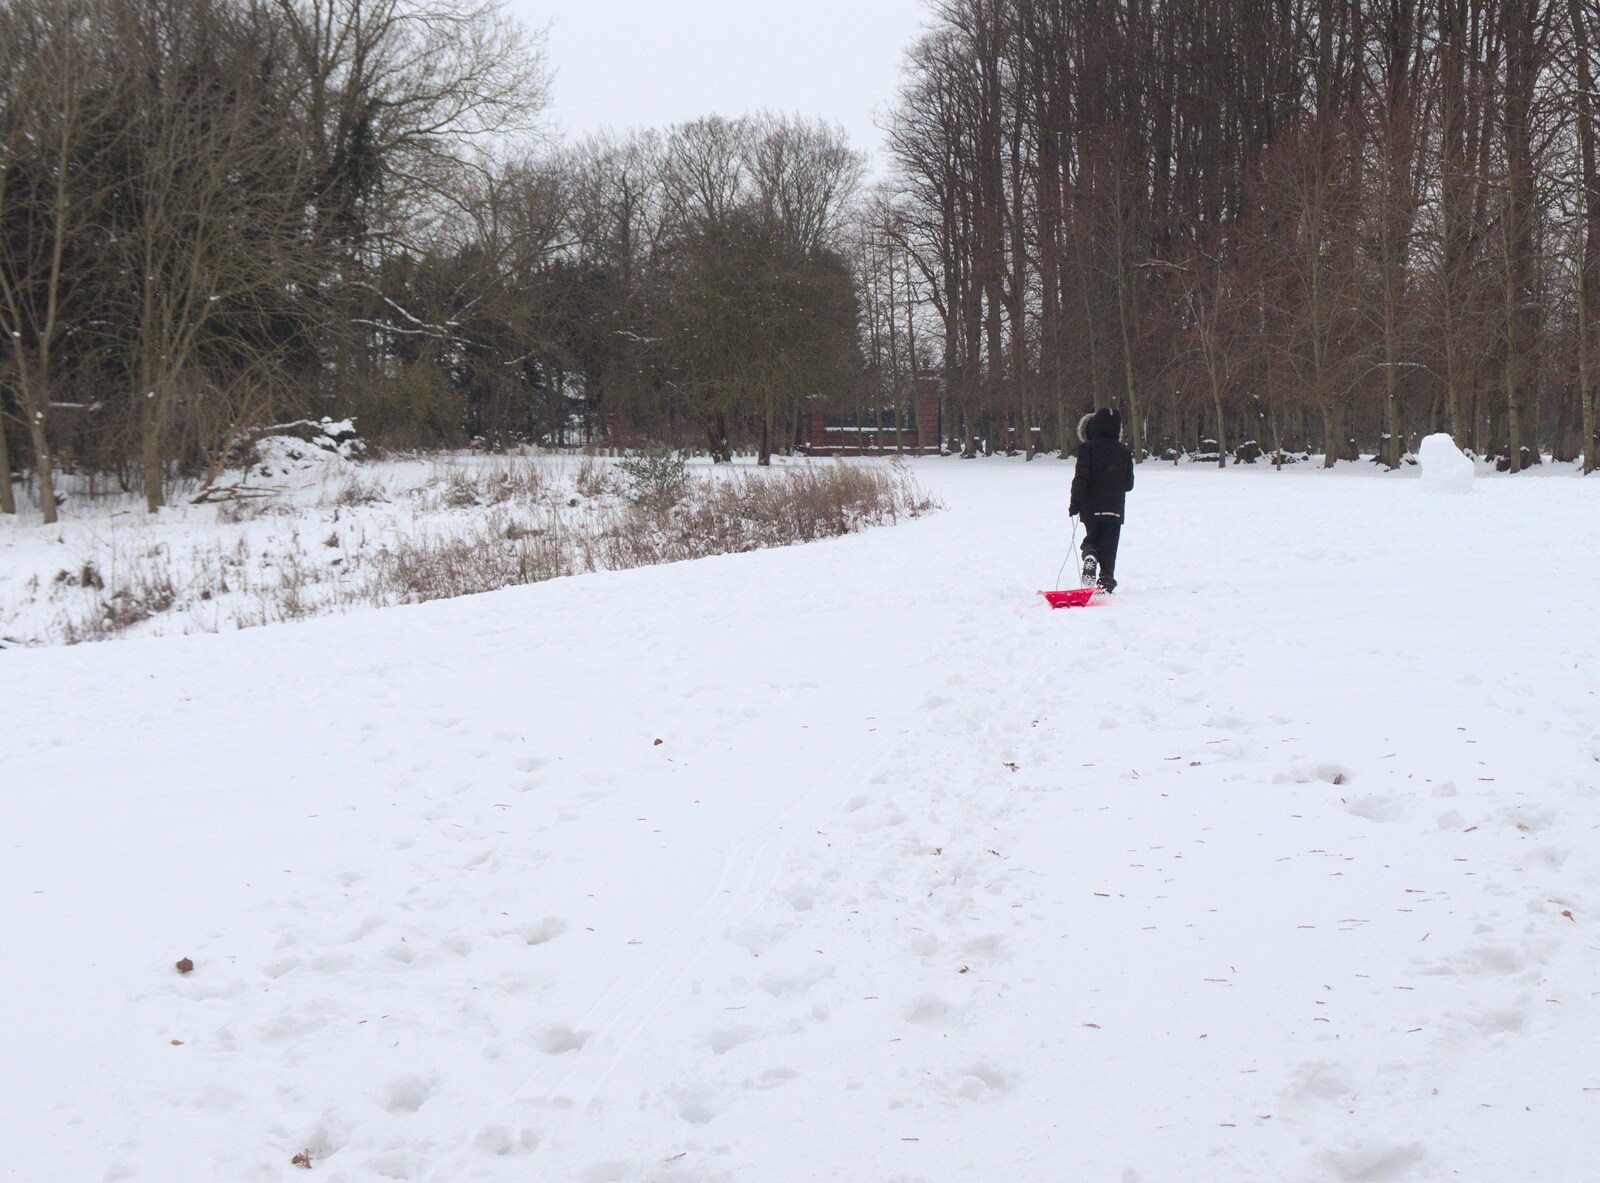 Fred heads off to the hill by the lake from More March Snow and a Postcard from Diss, Norfolk - 3rd March 2018